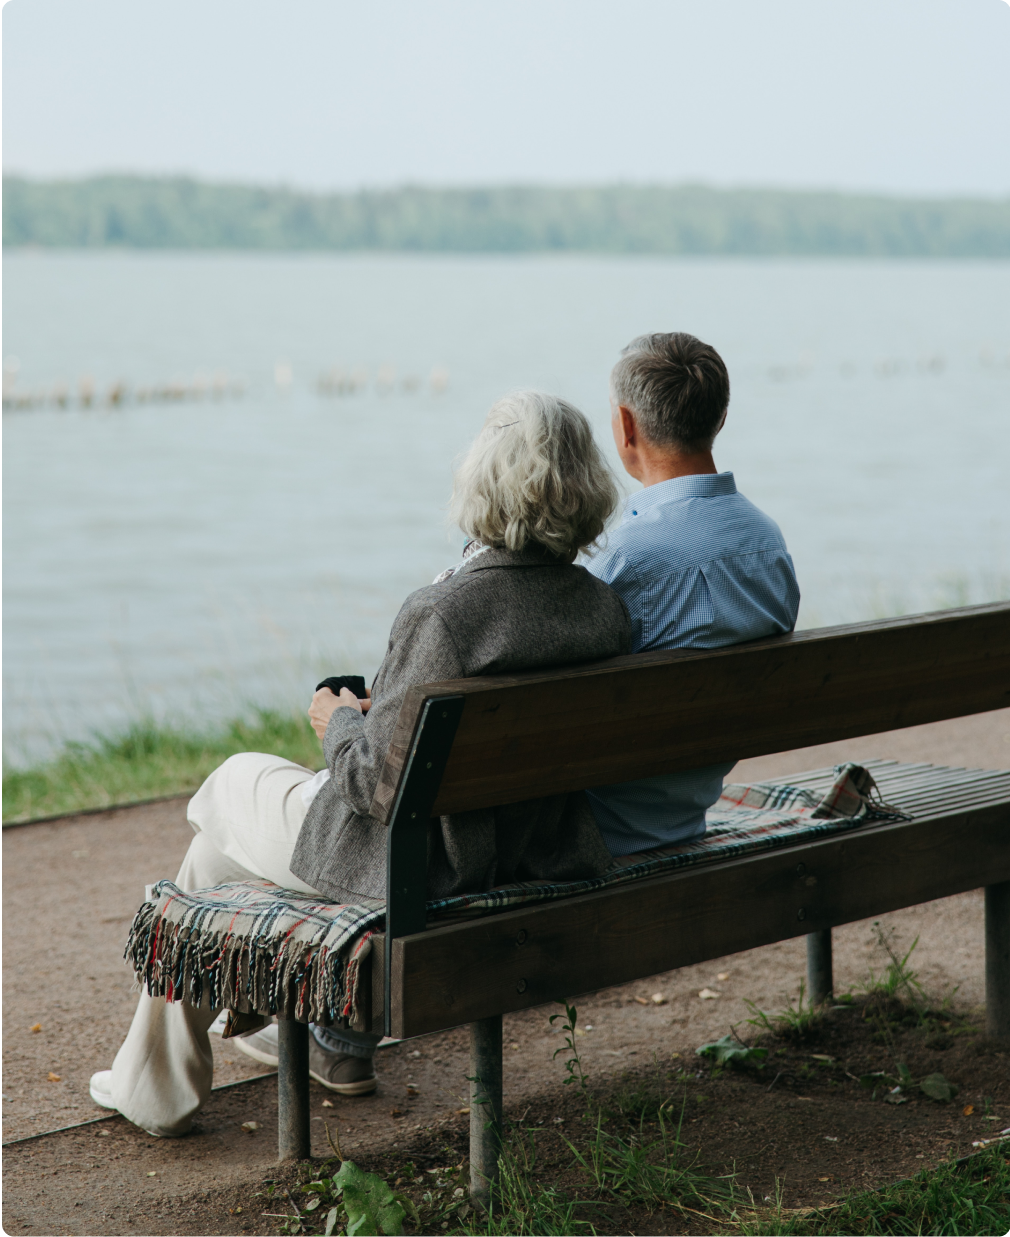 Couple sitting on a bench overlooking water